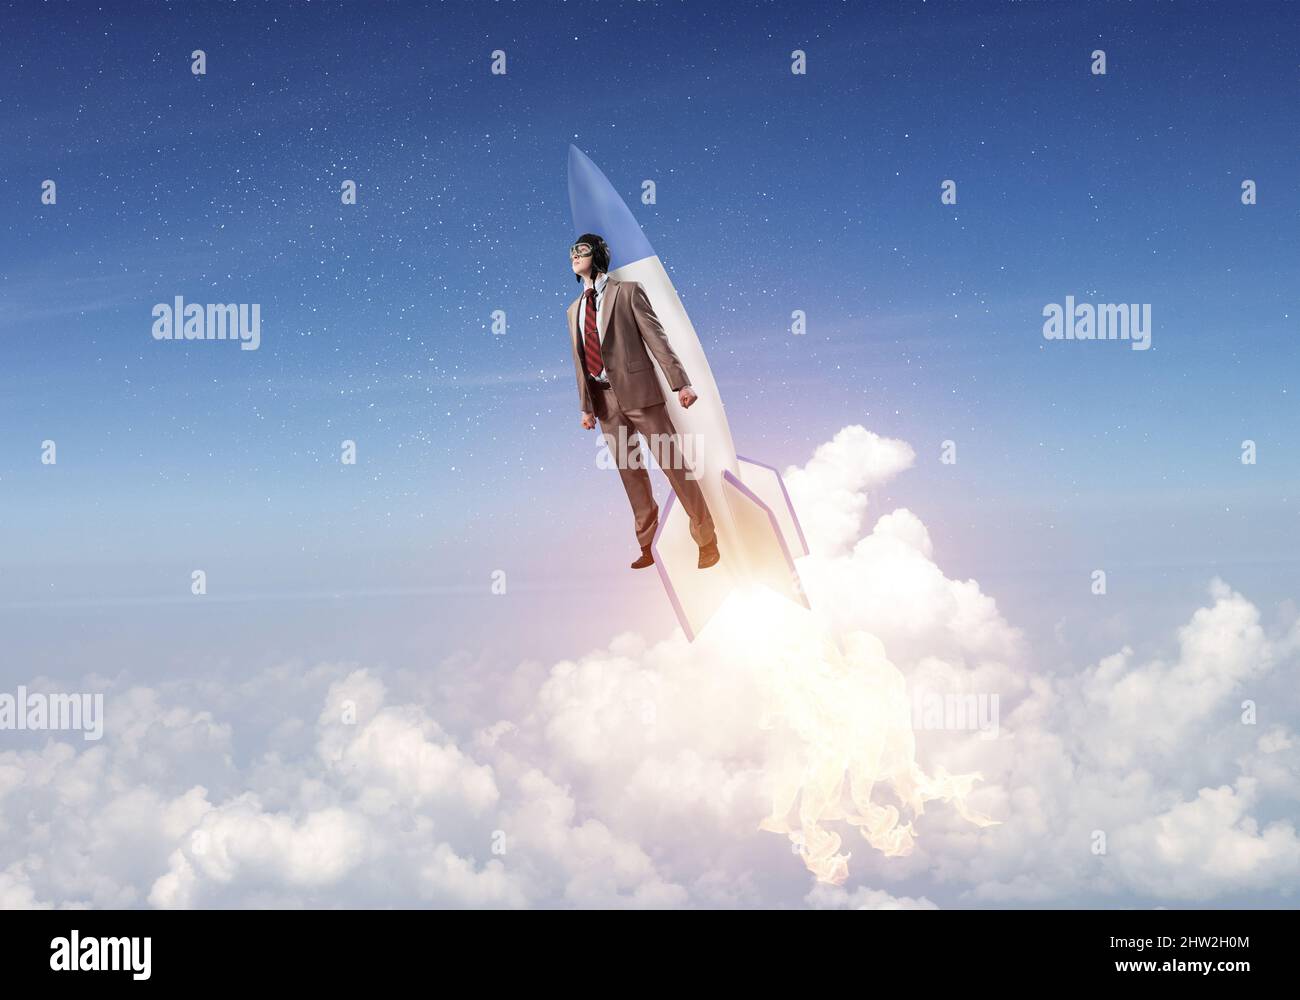 Business person in aviator hat flying on rocket Stock Photo